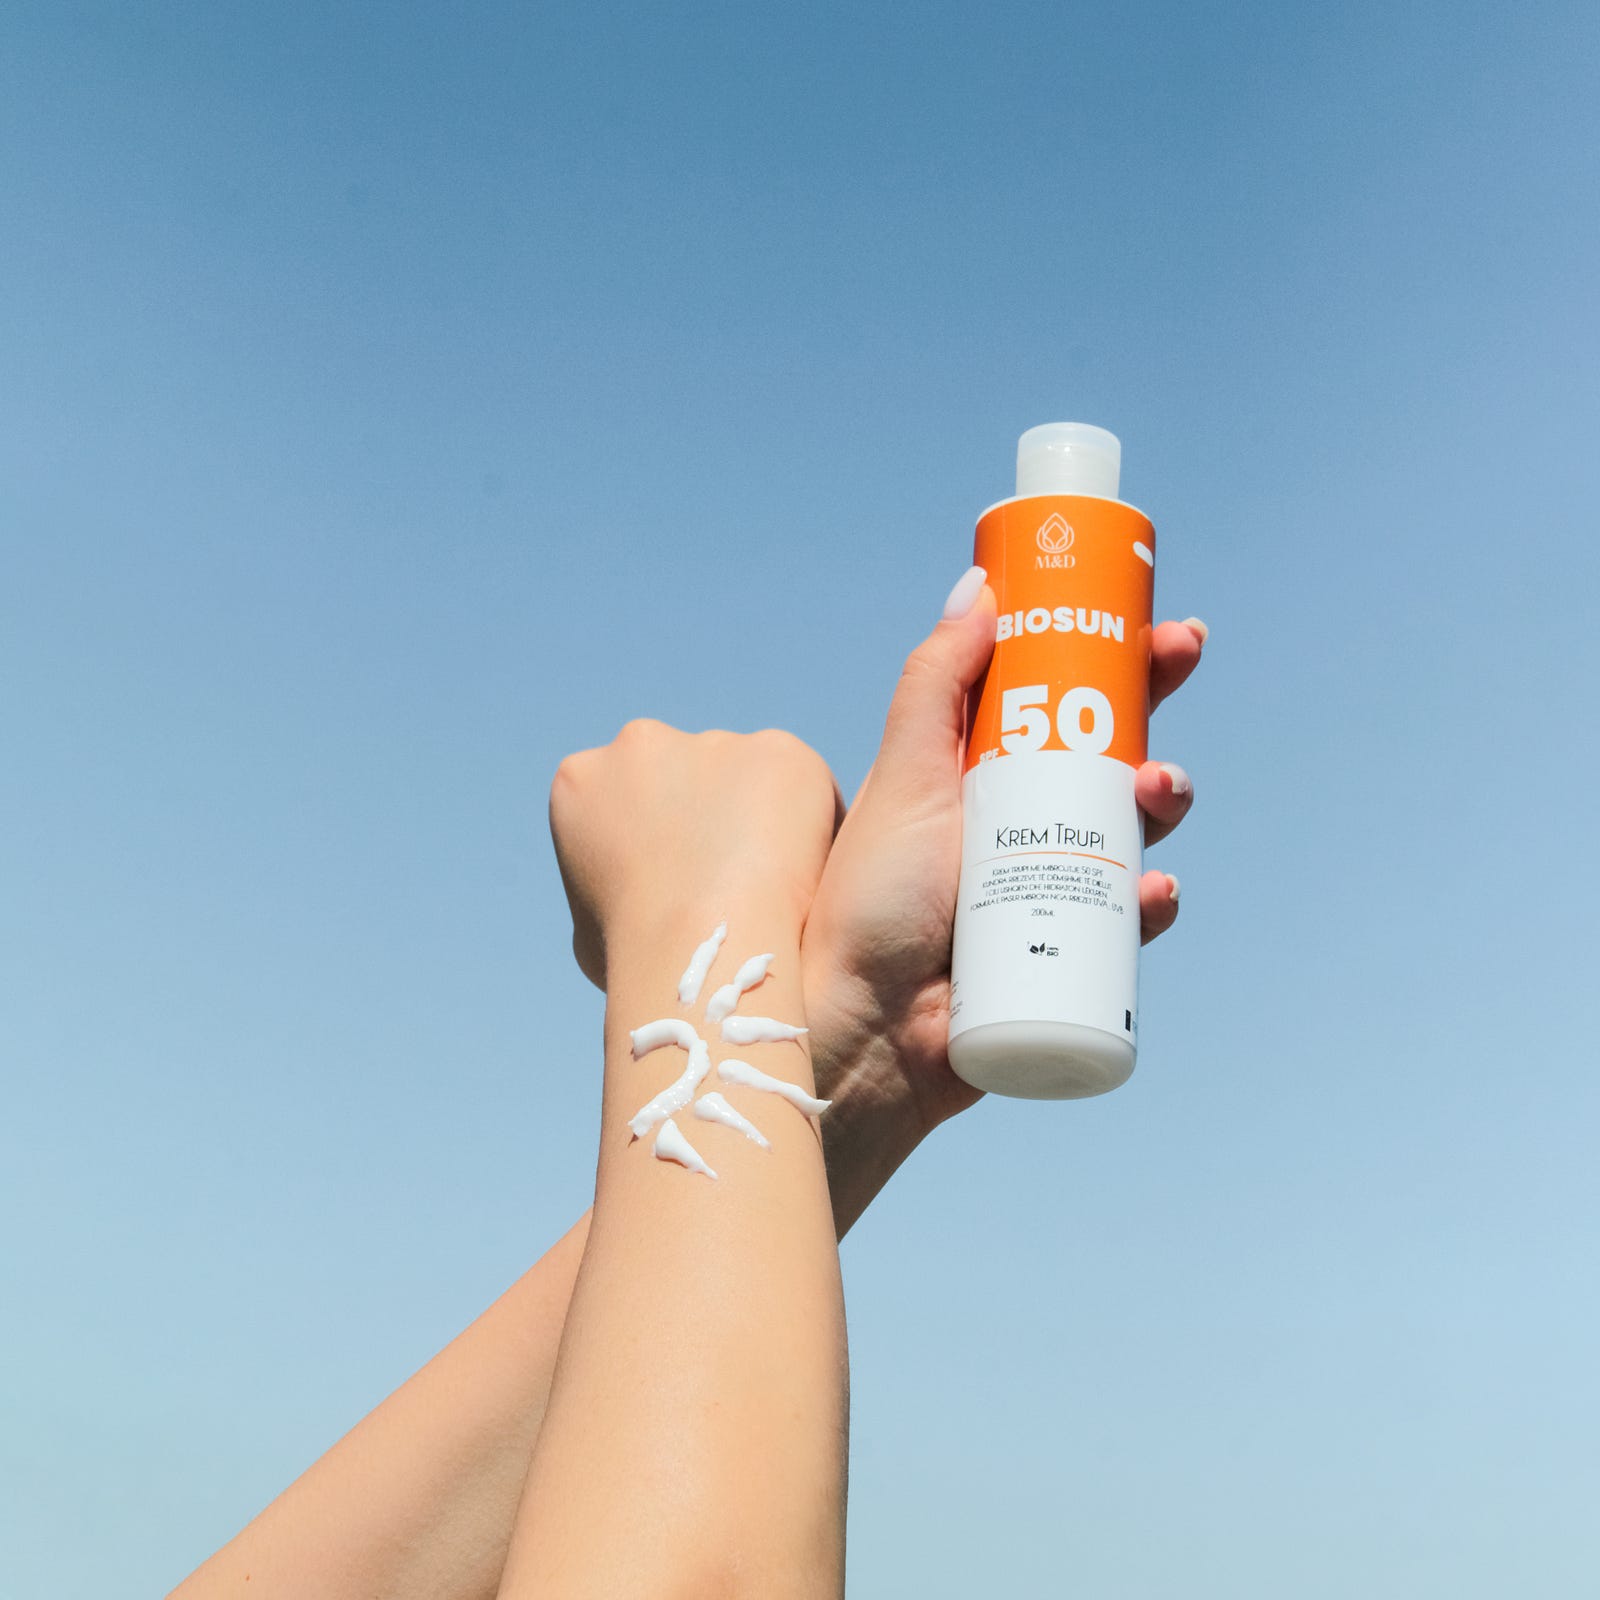 A left hand rises to hold an SPF 50 sunscreen bottle. To obtain the EWG mark, the item must be “green,” with little danger to health or the environment. The product must list each ingredient on the label, including nanoparticles and fragrances. It cannot contain ingredients restricted by the European Union and Canada, as well as the FDA, the US Environmental Protection Agency, the US National Toxicology Program, and California’s Proposition 65 list of known carcinogens and reproductive toxins.